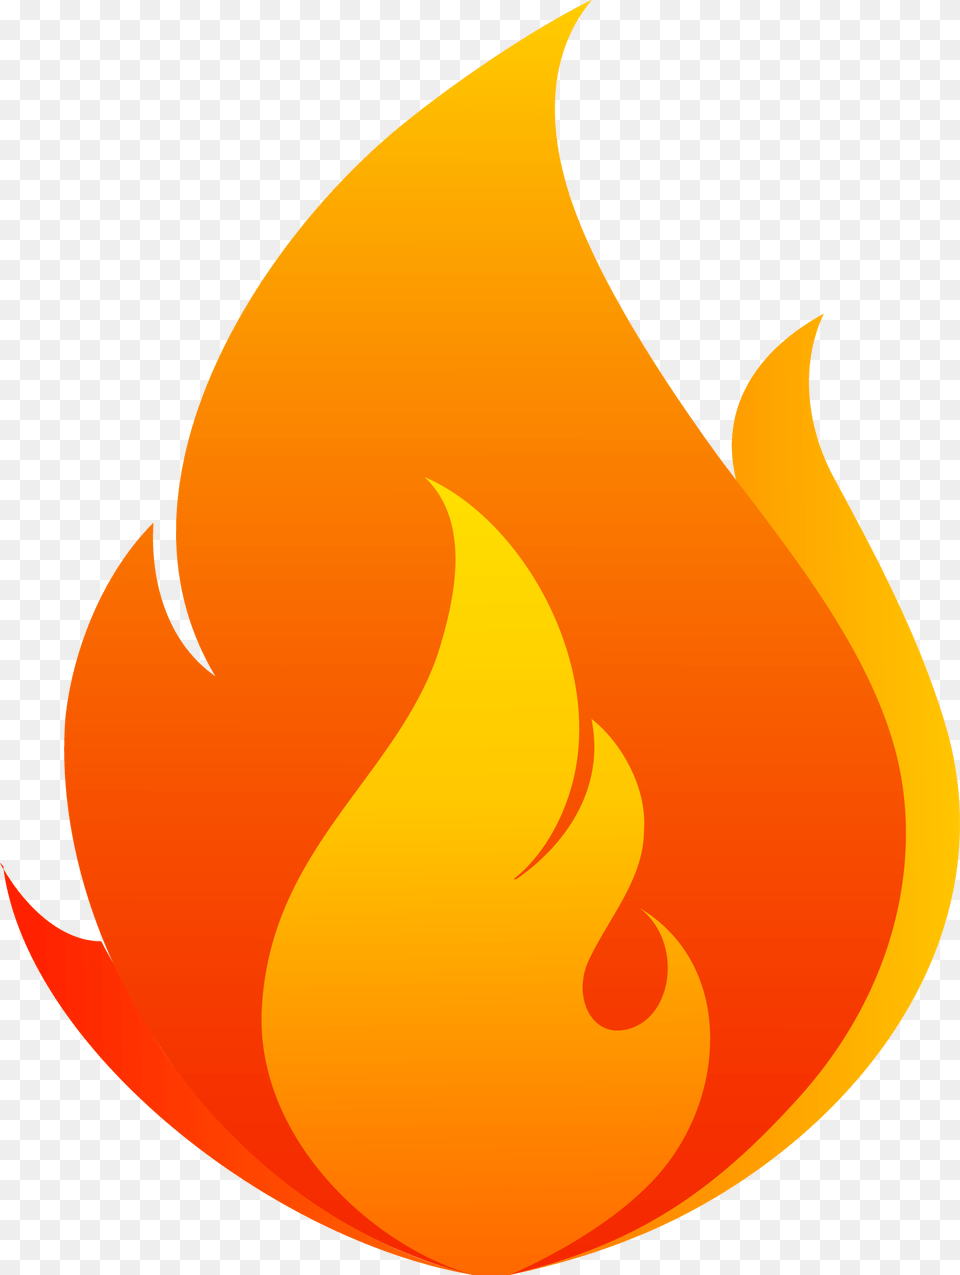 Red Vector Flowing Flames Transparent Flame Vector, Fire, Astronomy, Moon, Nature Png Image